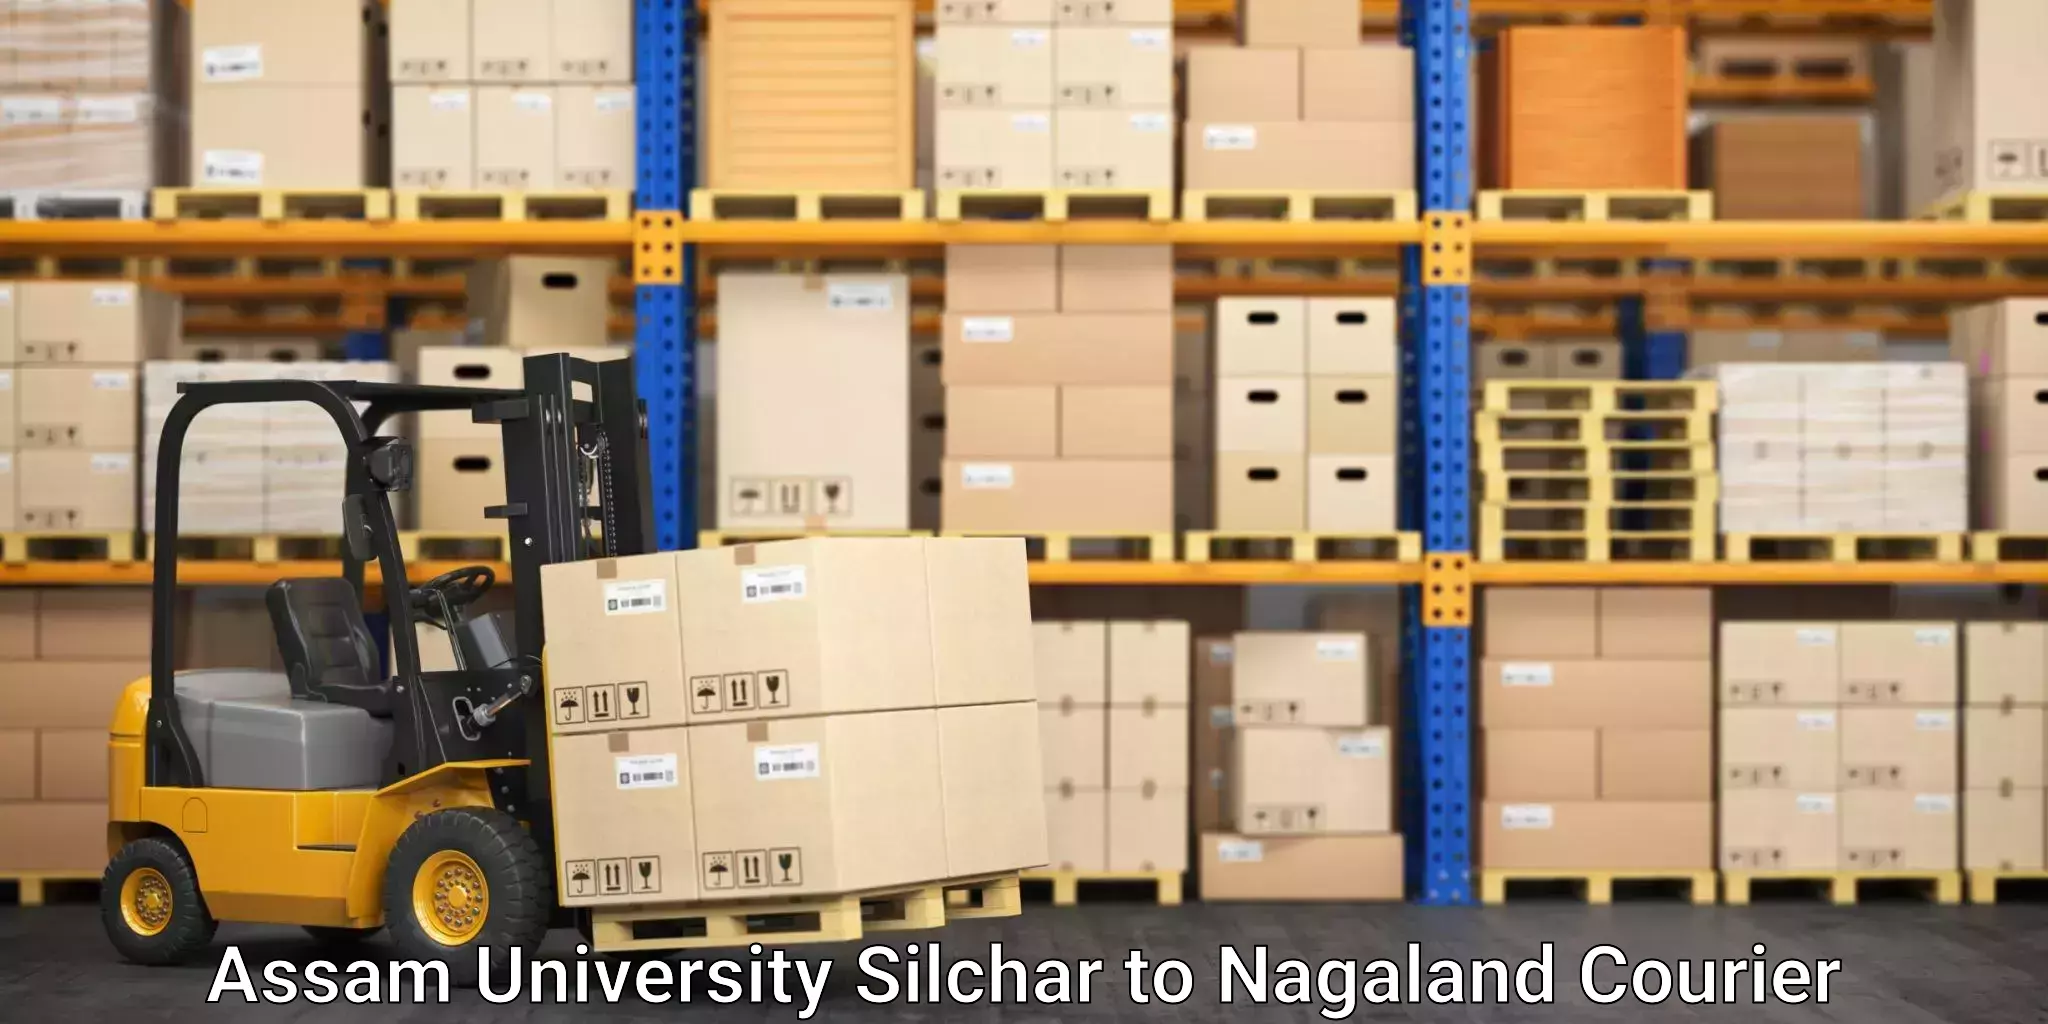 Reliable freight solutions Assam University Silchar to Dimapur